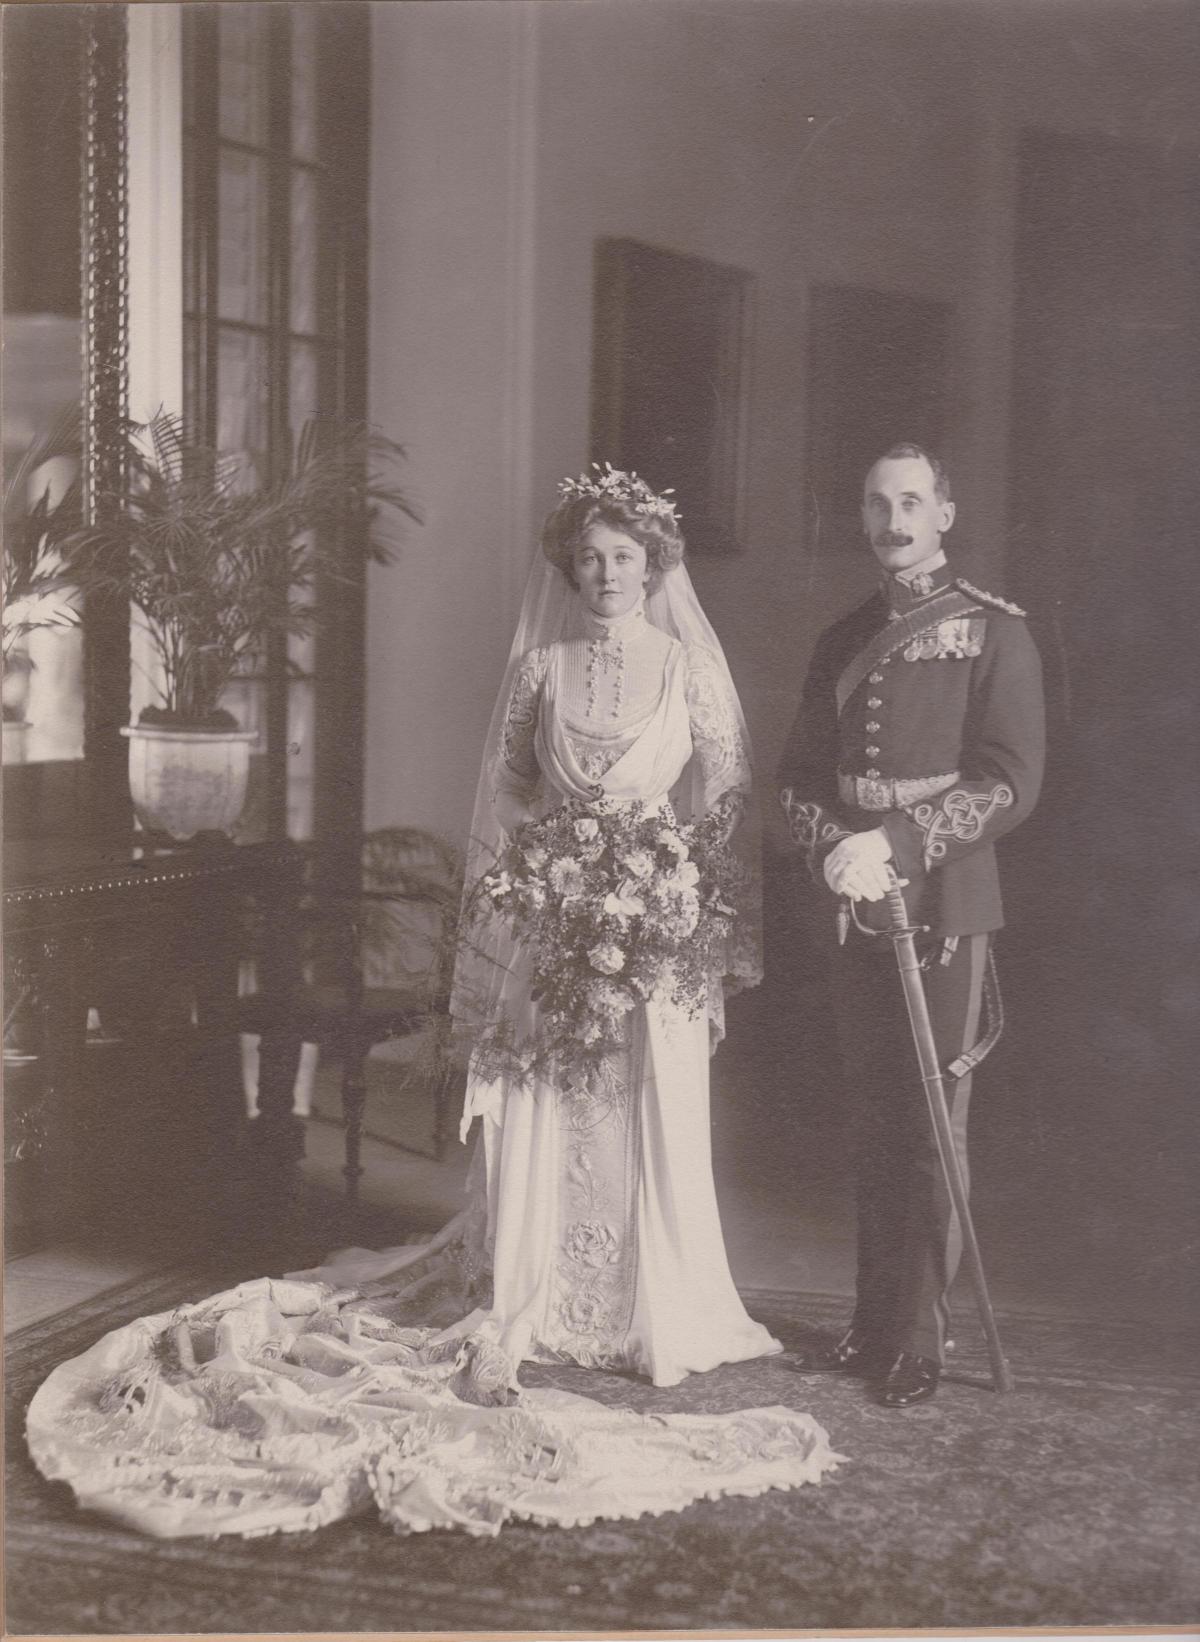 Grandfather of the current Lord Lansdowne (9th Marquis), Lord Charles was survived by young widow, Violet, their daughter Margaret, 4, and son, George, nearly 2, as well as by his heart-broken parents. Pictured: George and Violet's wedding day in 1909.